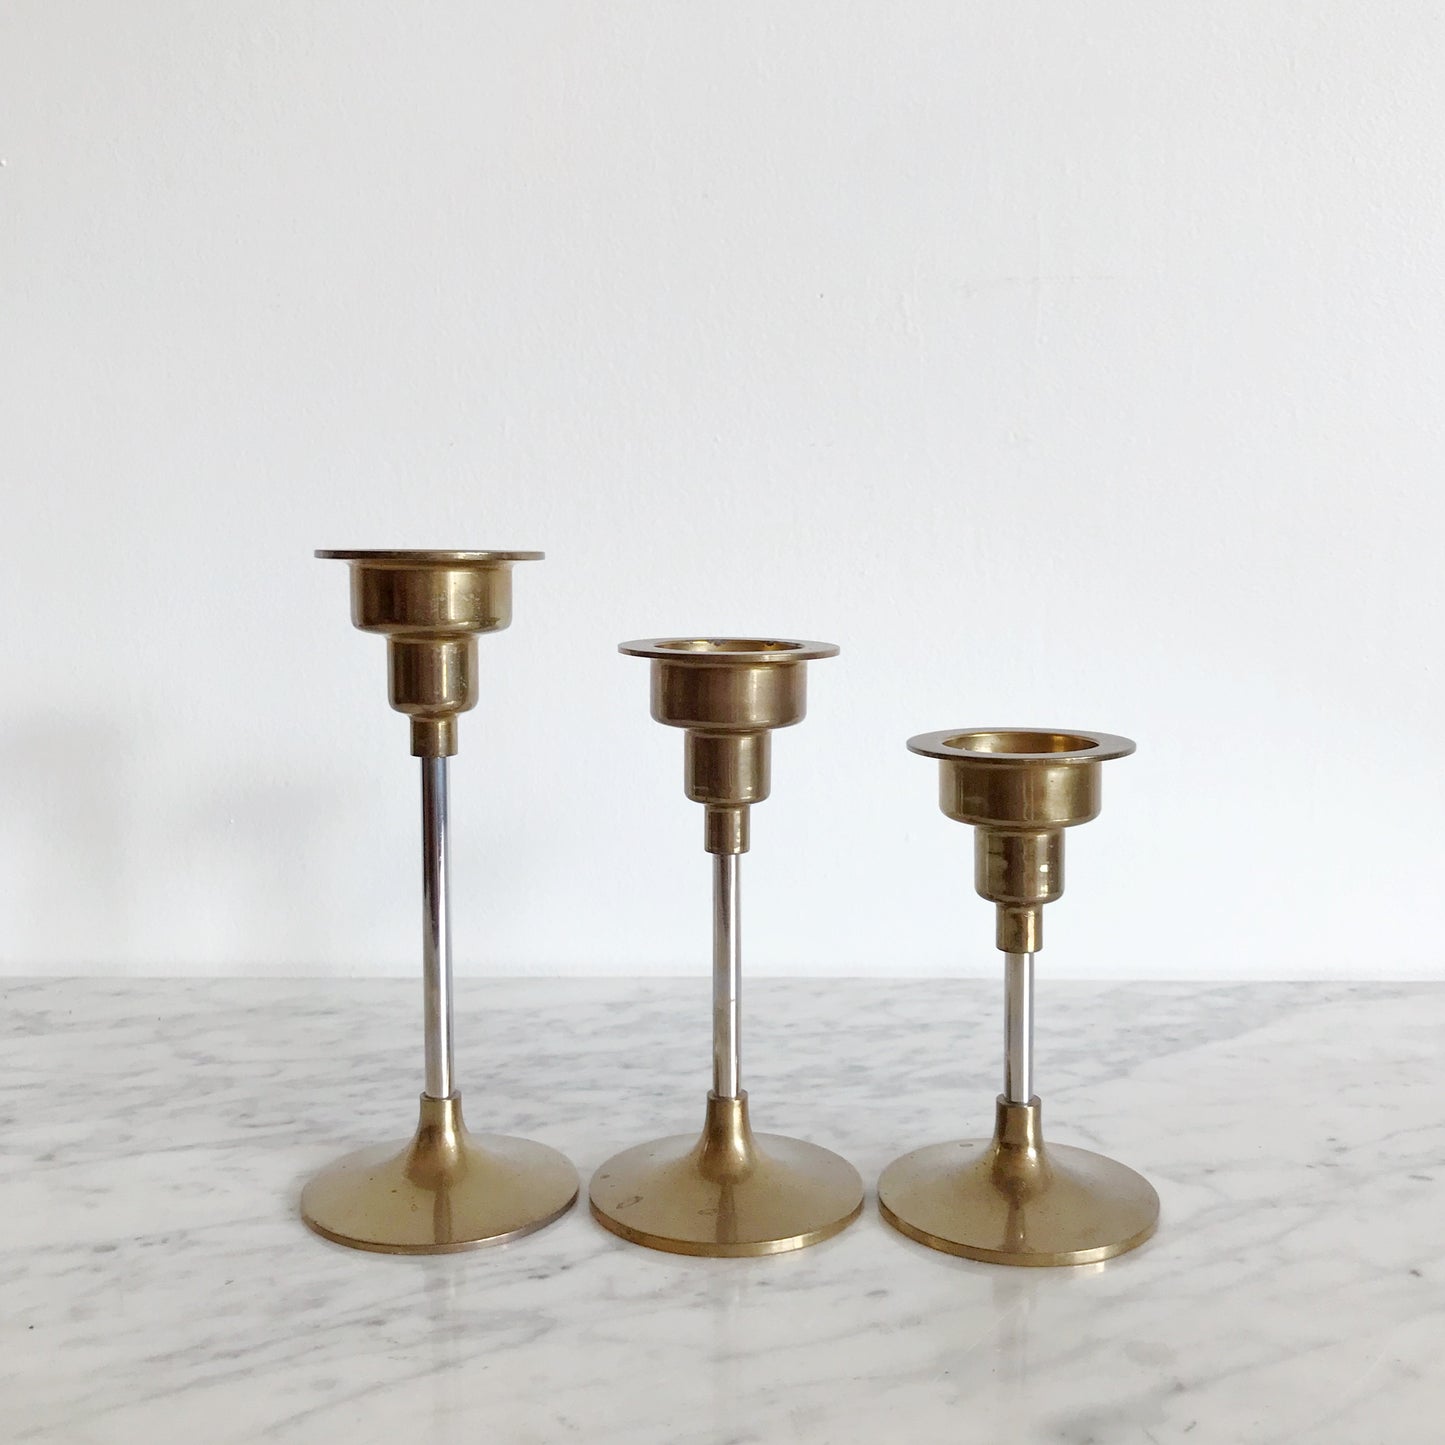 Set of 3 Post-Modern Candle Holders